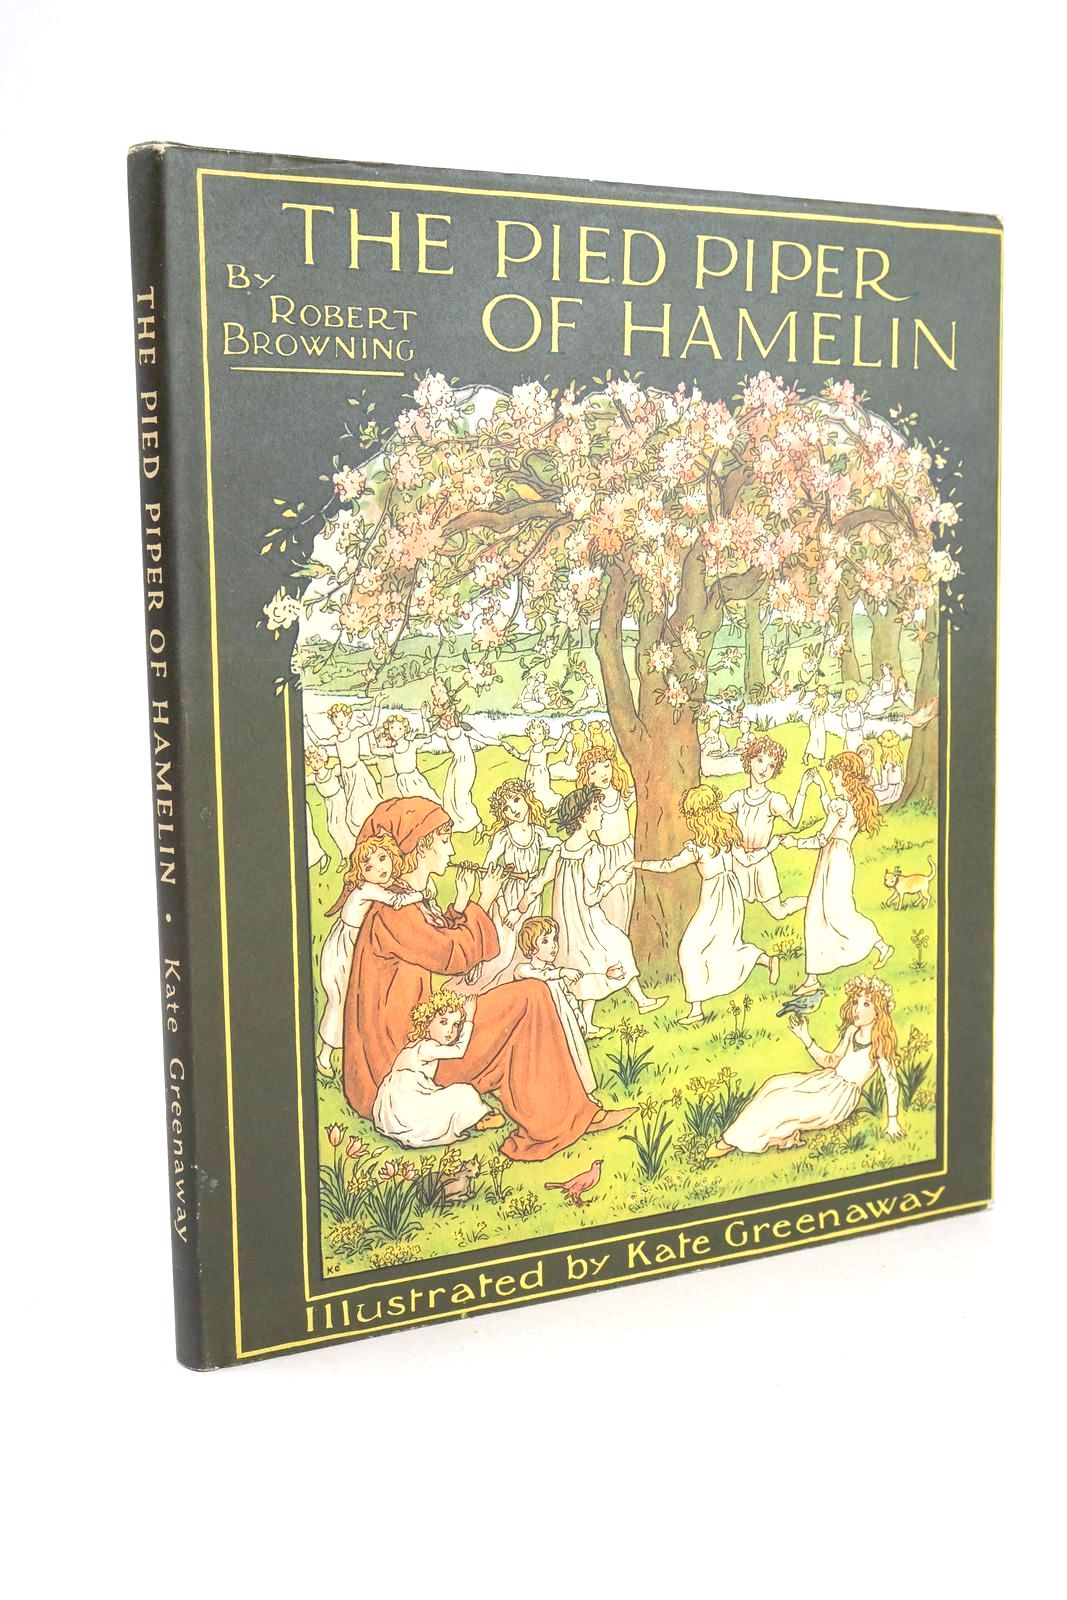 Photo of THE PIED PIPER OF HAMELIN written by Browning, Robert illustrated by Greenaway, Kate published by Frederick Warne &amp; Co Ltd. (STOCK CODE: 1325612)  for sale by Stella & Rose's Books